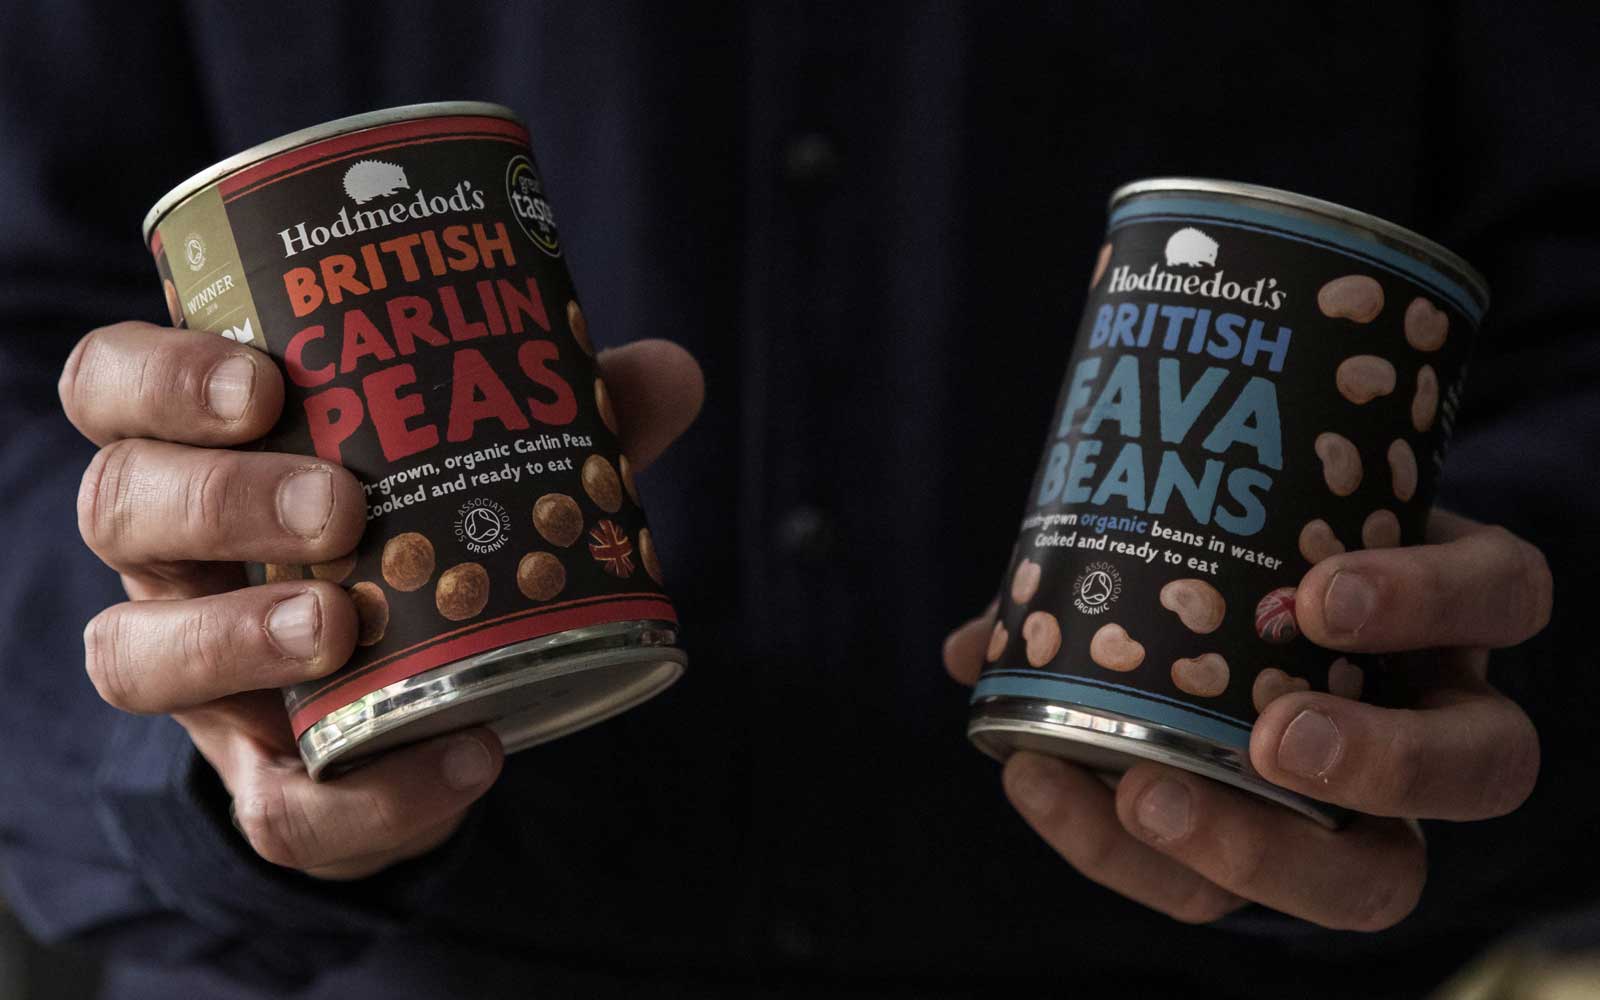 Canned Carlin Peas and Fava Beans